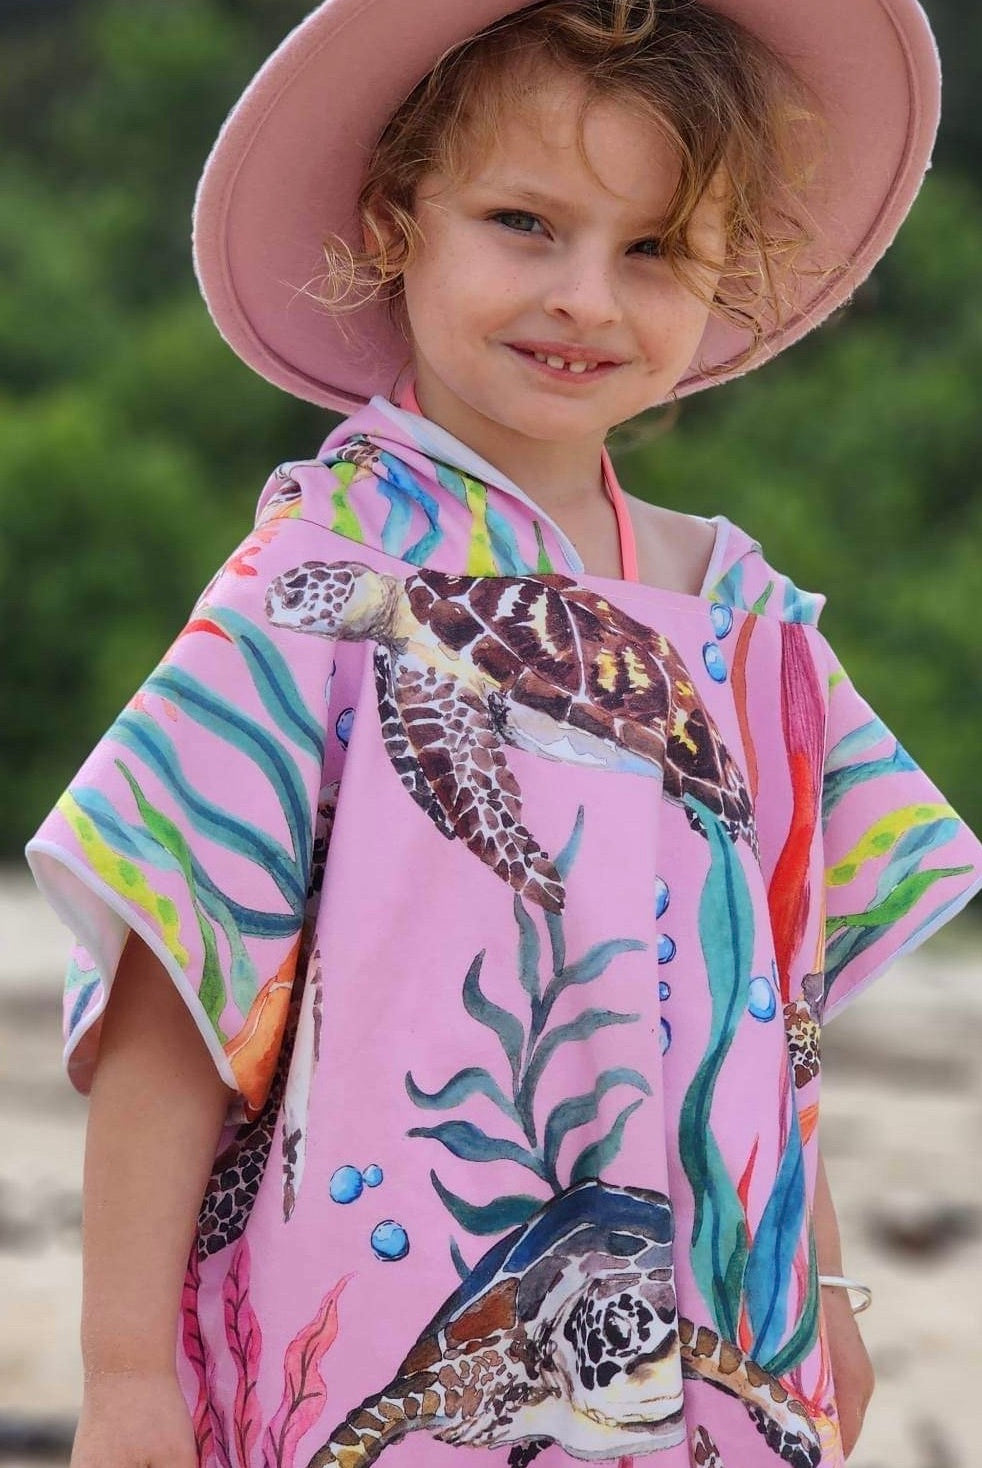 Behold the beauty of a 5-year-old girl adorned in the most popular design from Sandi Toes' sand-free hooded towels collection – 'Turtle Cove.' This captivating print features turtles gracefully swimming amidst sea grasses on a predominantly pink background. Now available in Large sizes, in addition to Small and Medium, this towel is your perfect companion for any adventure. The image also showcases the girl wearing a pink wide-brimmed hat (not included)